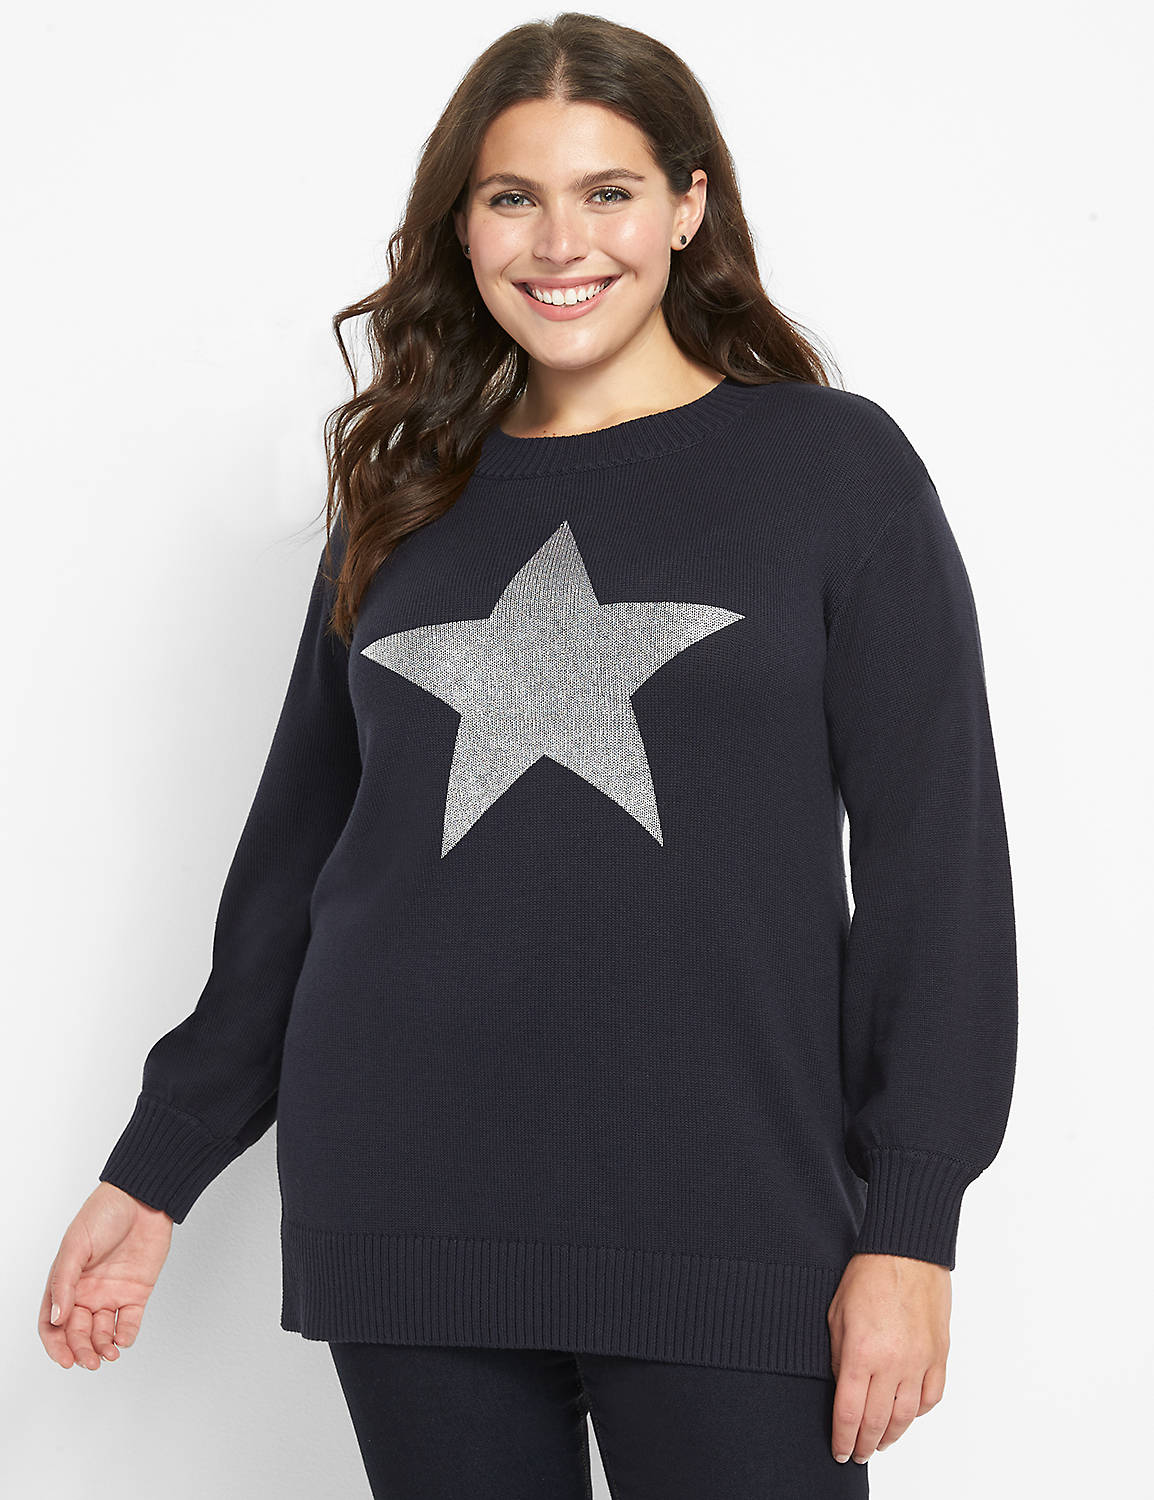 Star Tunic Sweater Product Image 1